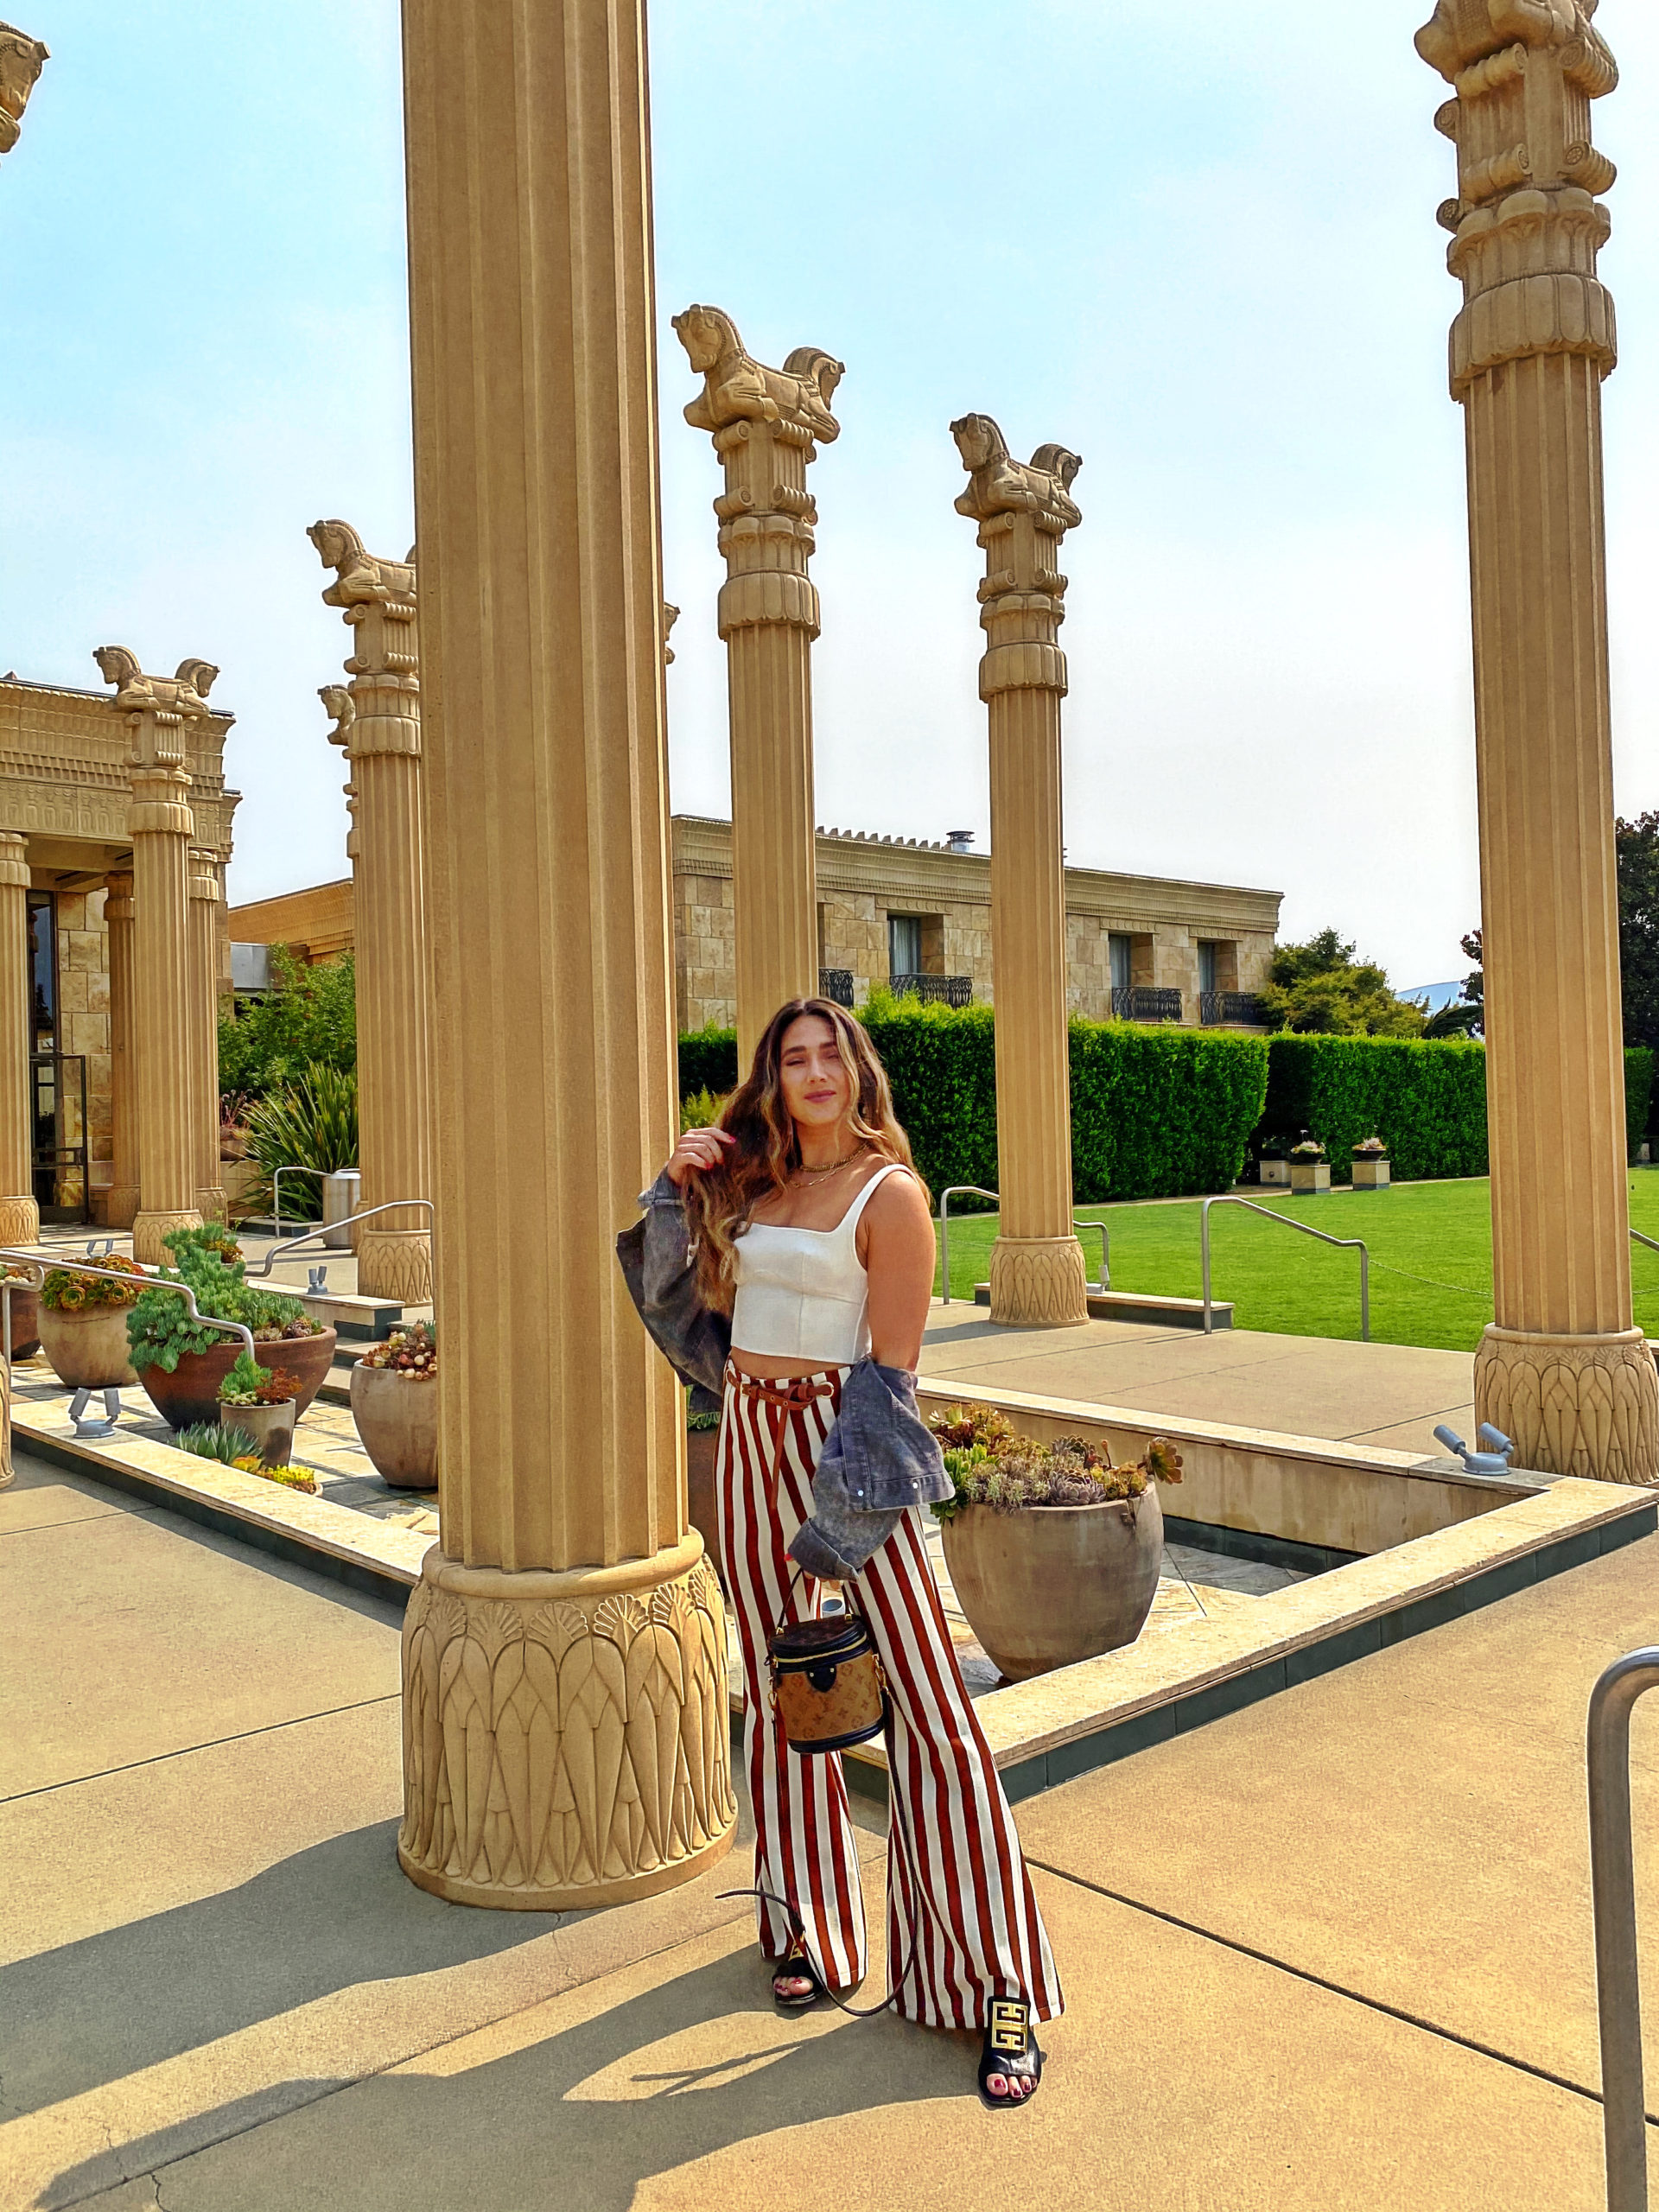 napa-valley-sonoma-wine-country-engagement-celebration-fun-outfits-wine-tasting